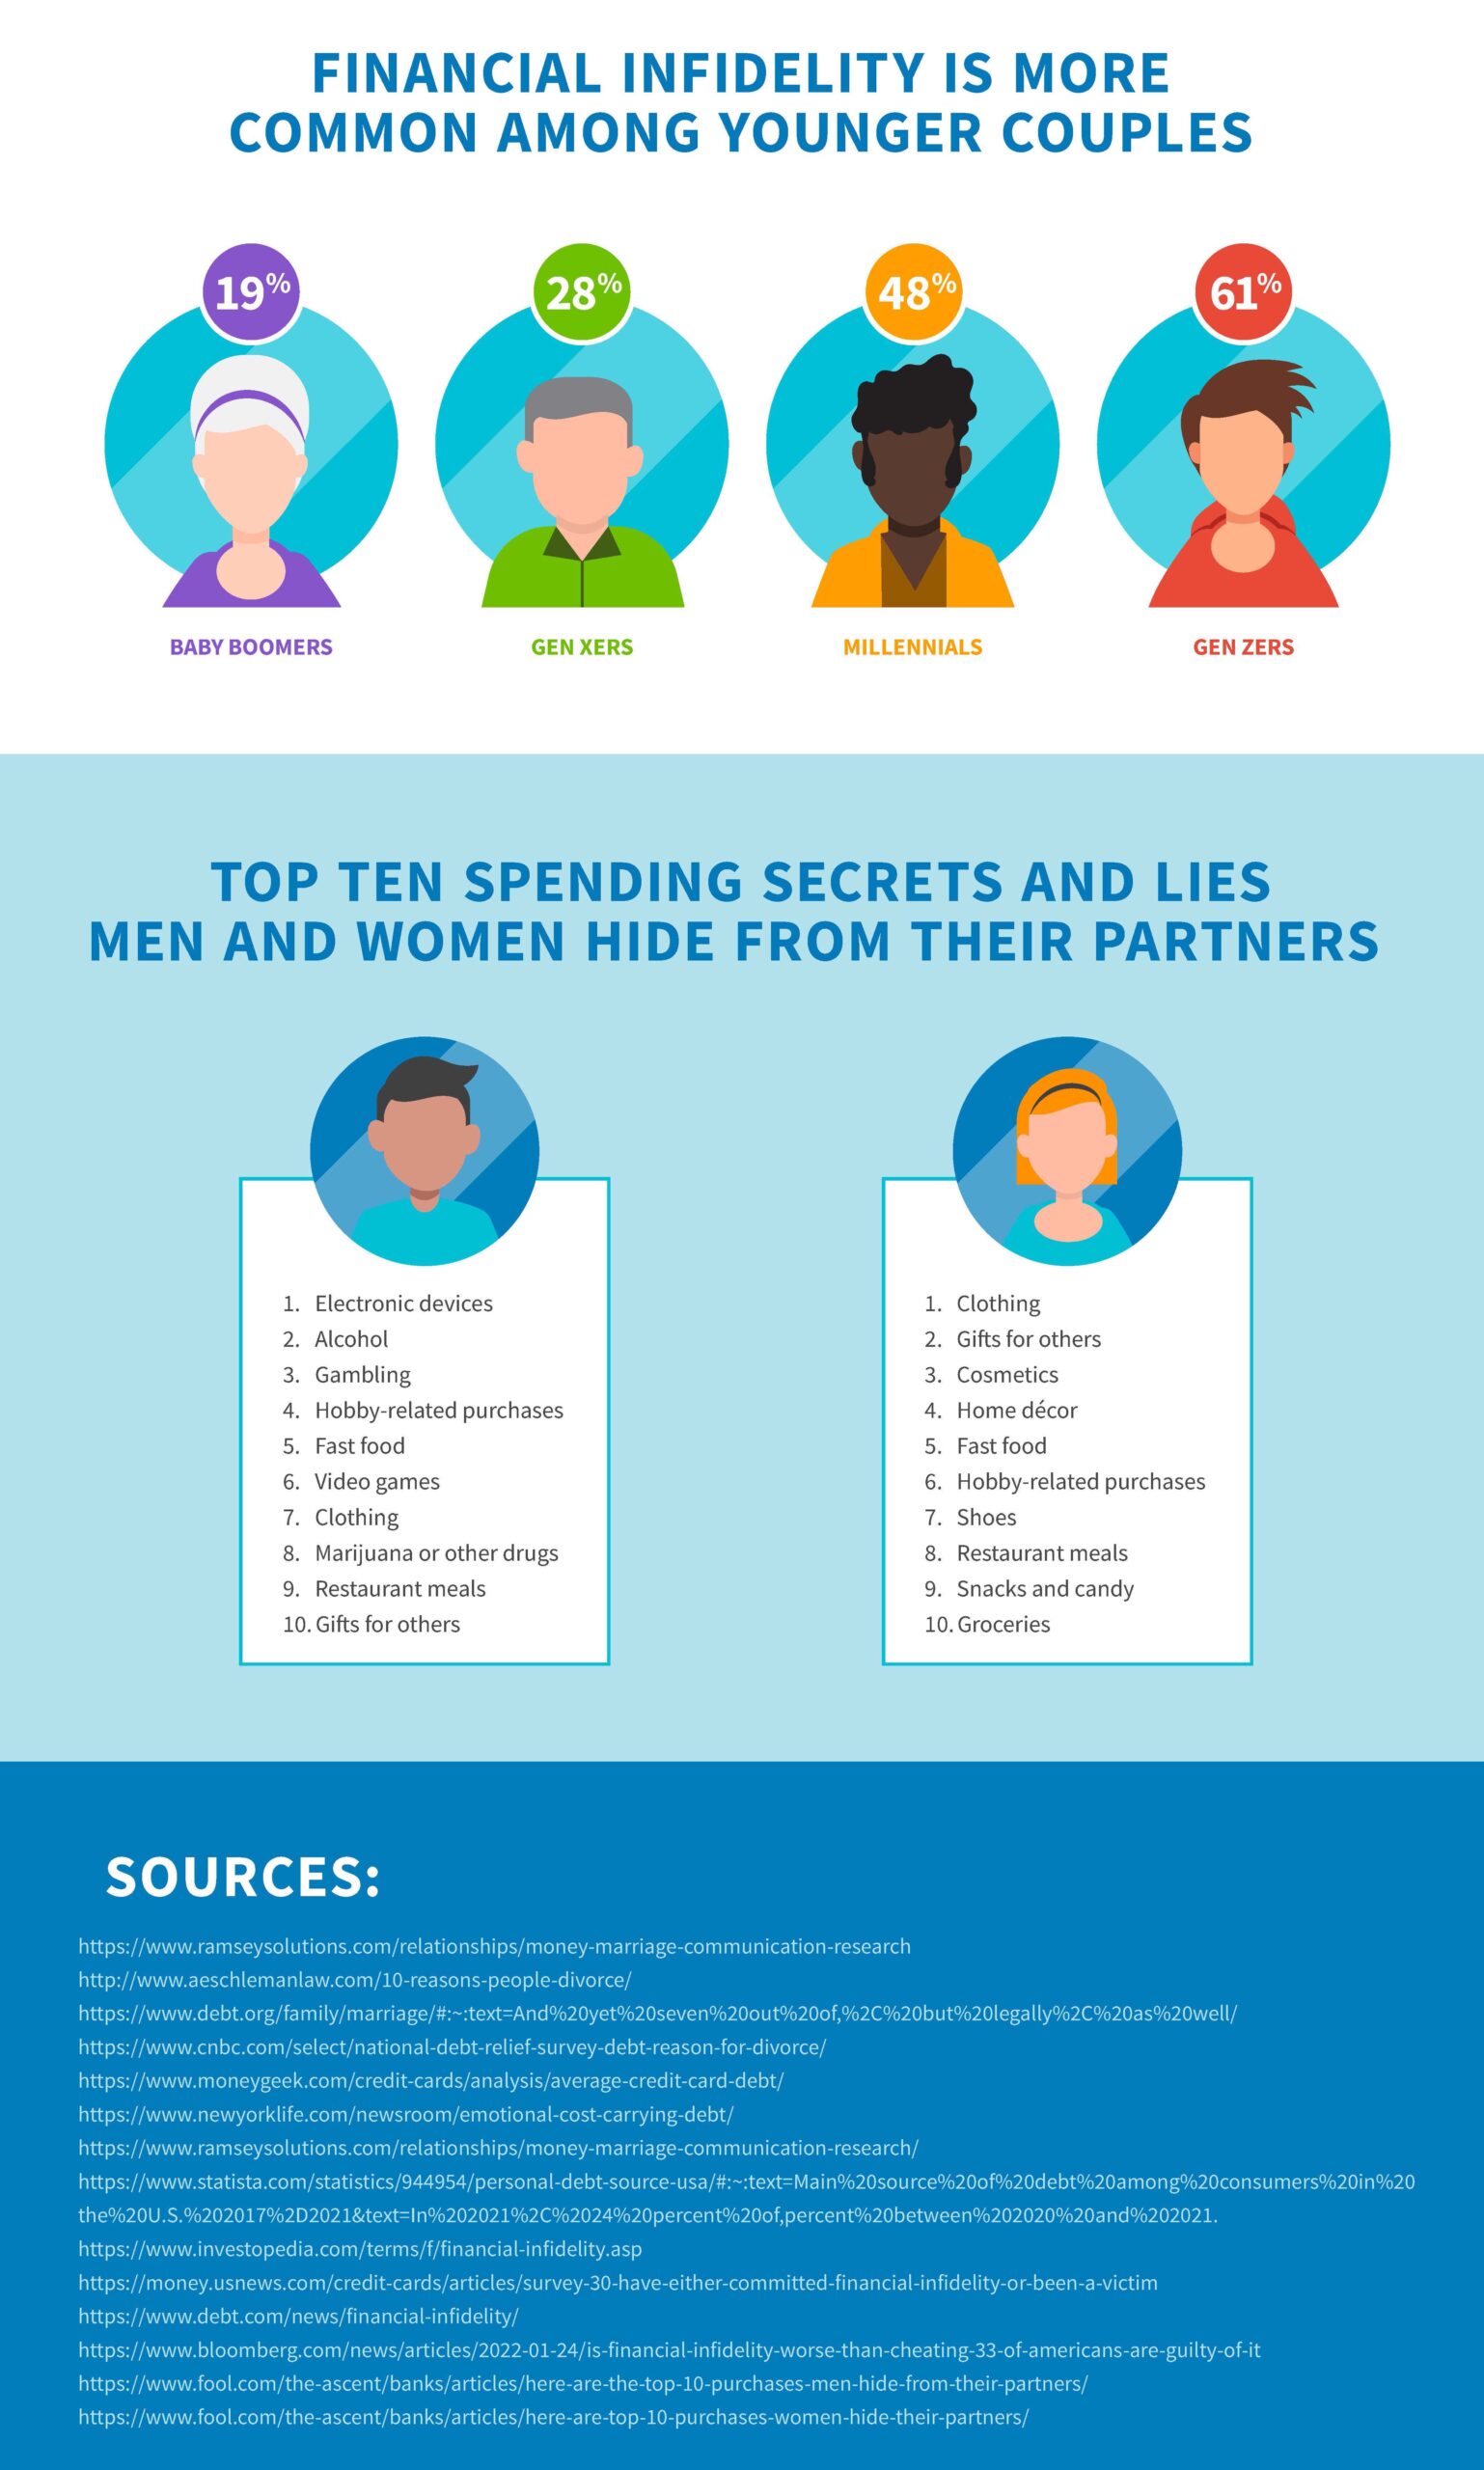 Financial infidelity is more common among younger couples